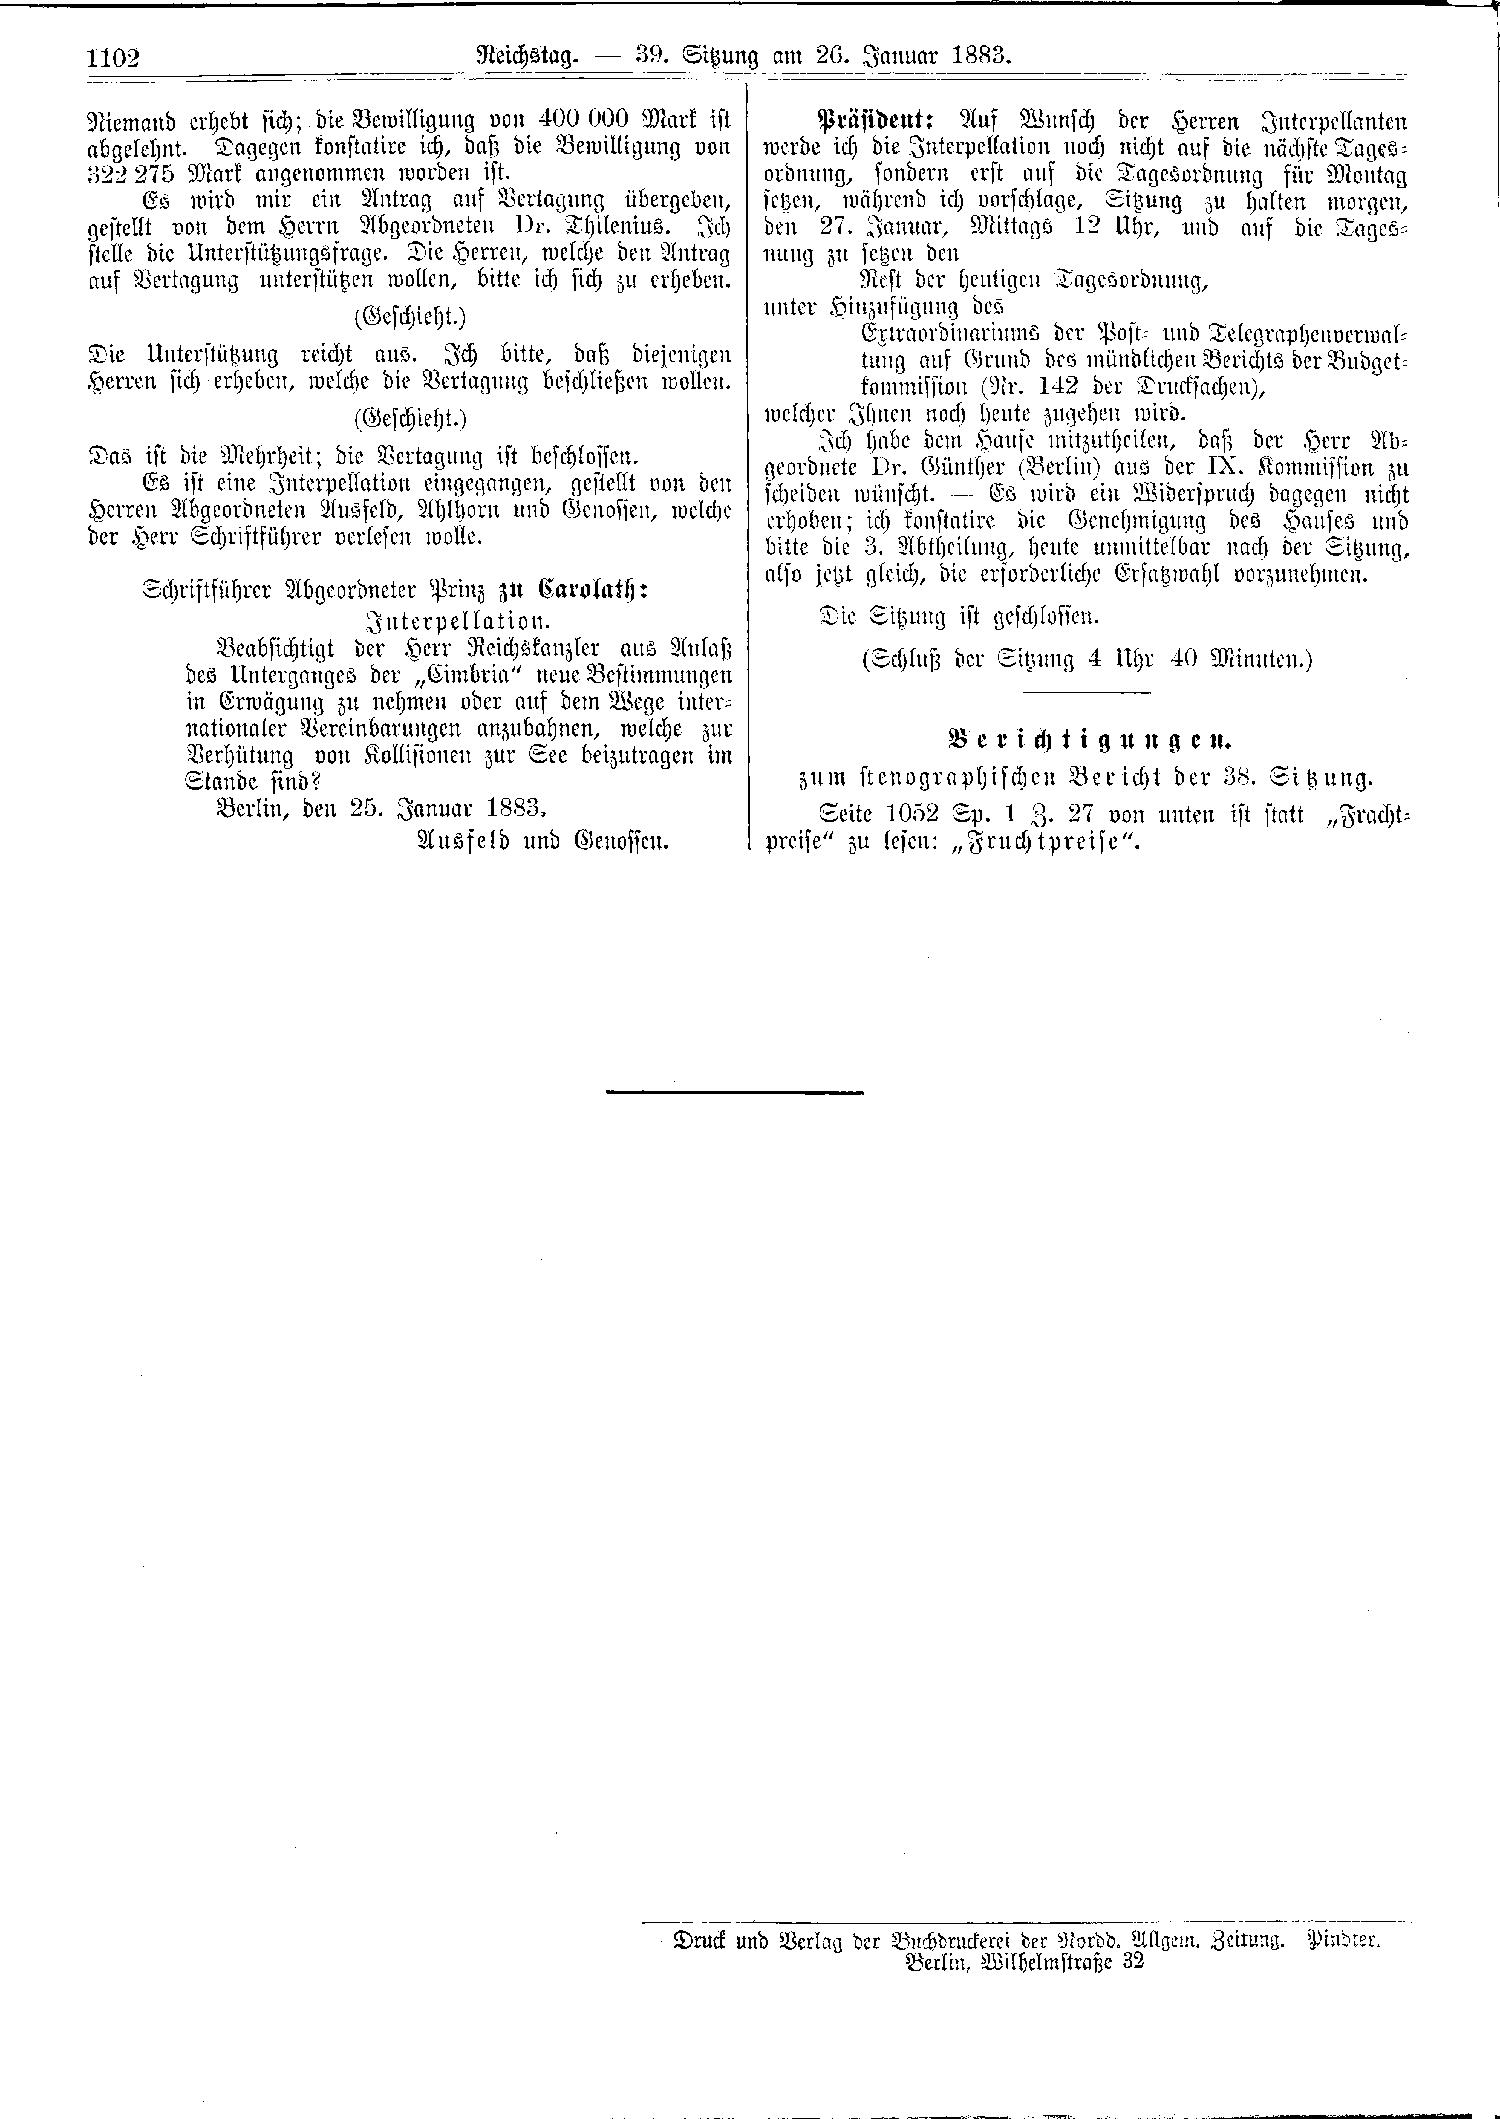 Scan of page 1102